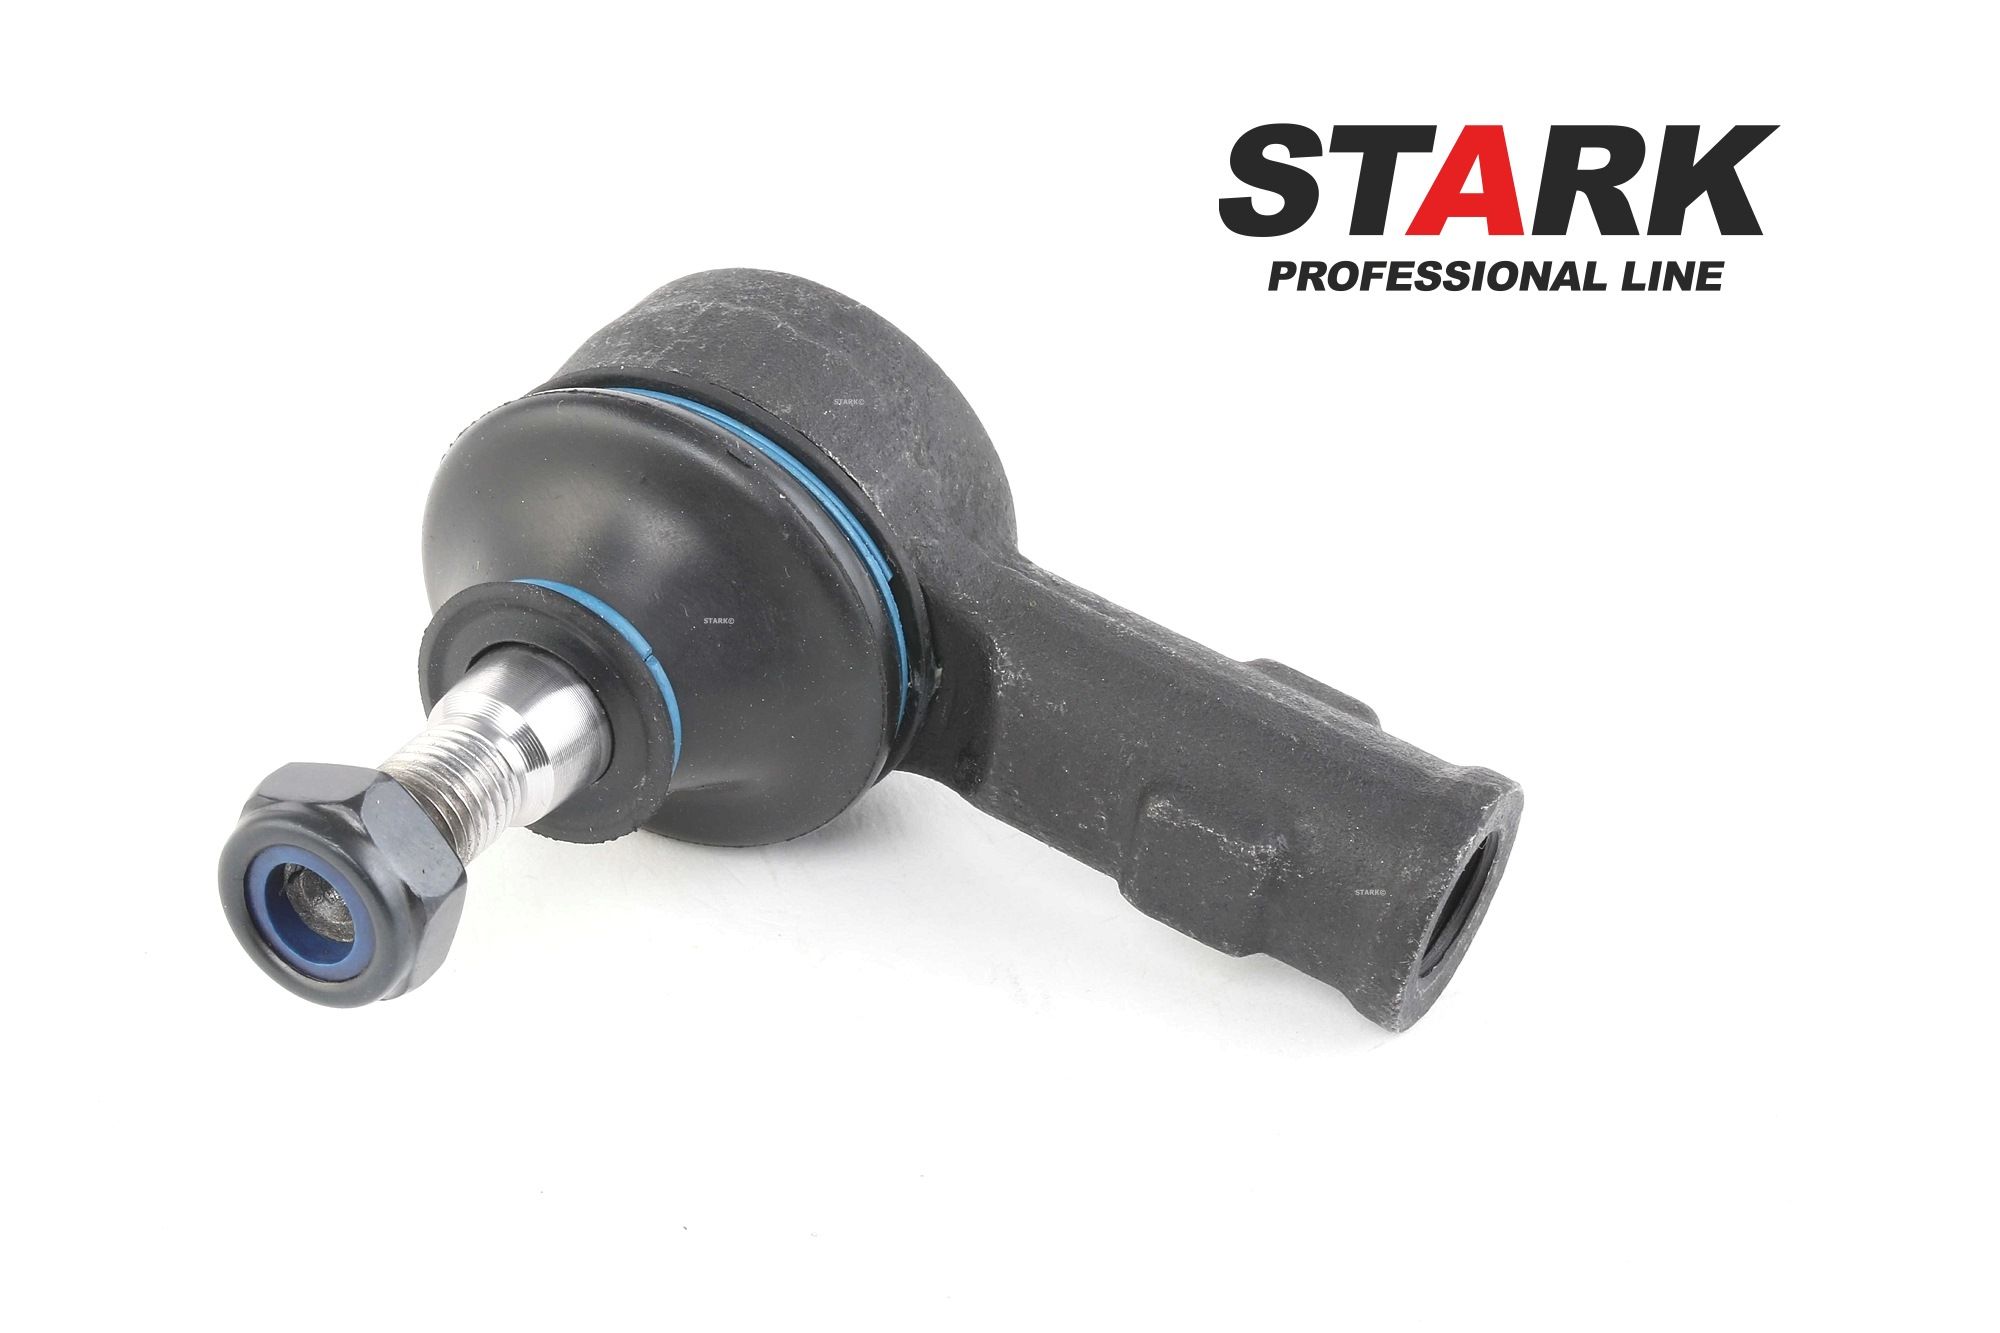 STARK SKTE-0280126 Track rod end Cone Size 11,6 mm, M10 x 1,25 mm, Front axle both sides, both sides, outer